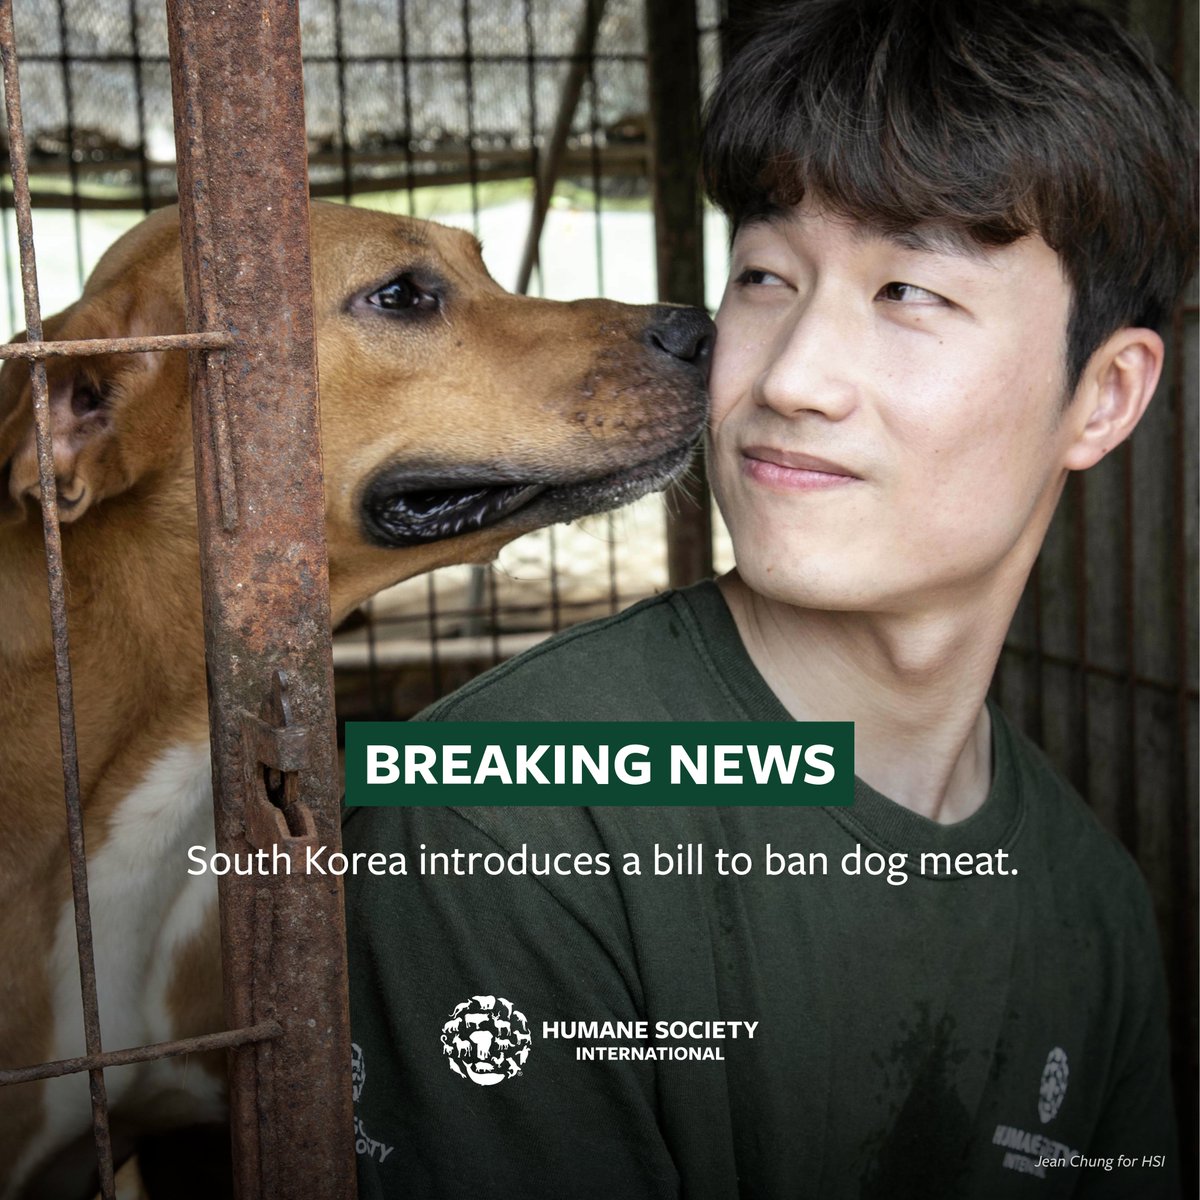 ❗️JUST IN❗️ : A bill has been introduced in South Korea that would END the cruel dog meat industry by banning the breeding and slaughter of dogs for consumption! HSI/Korea has worked with lawmakers behind the scenes to get to this moment – a critical step in our work to save